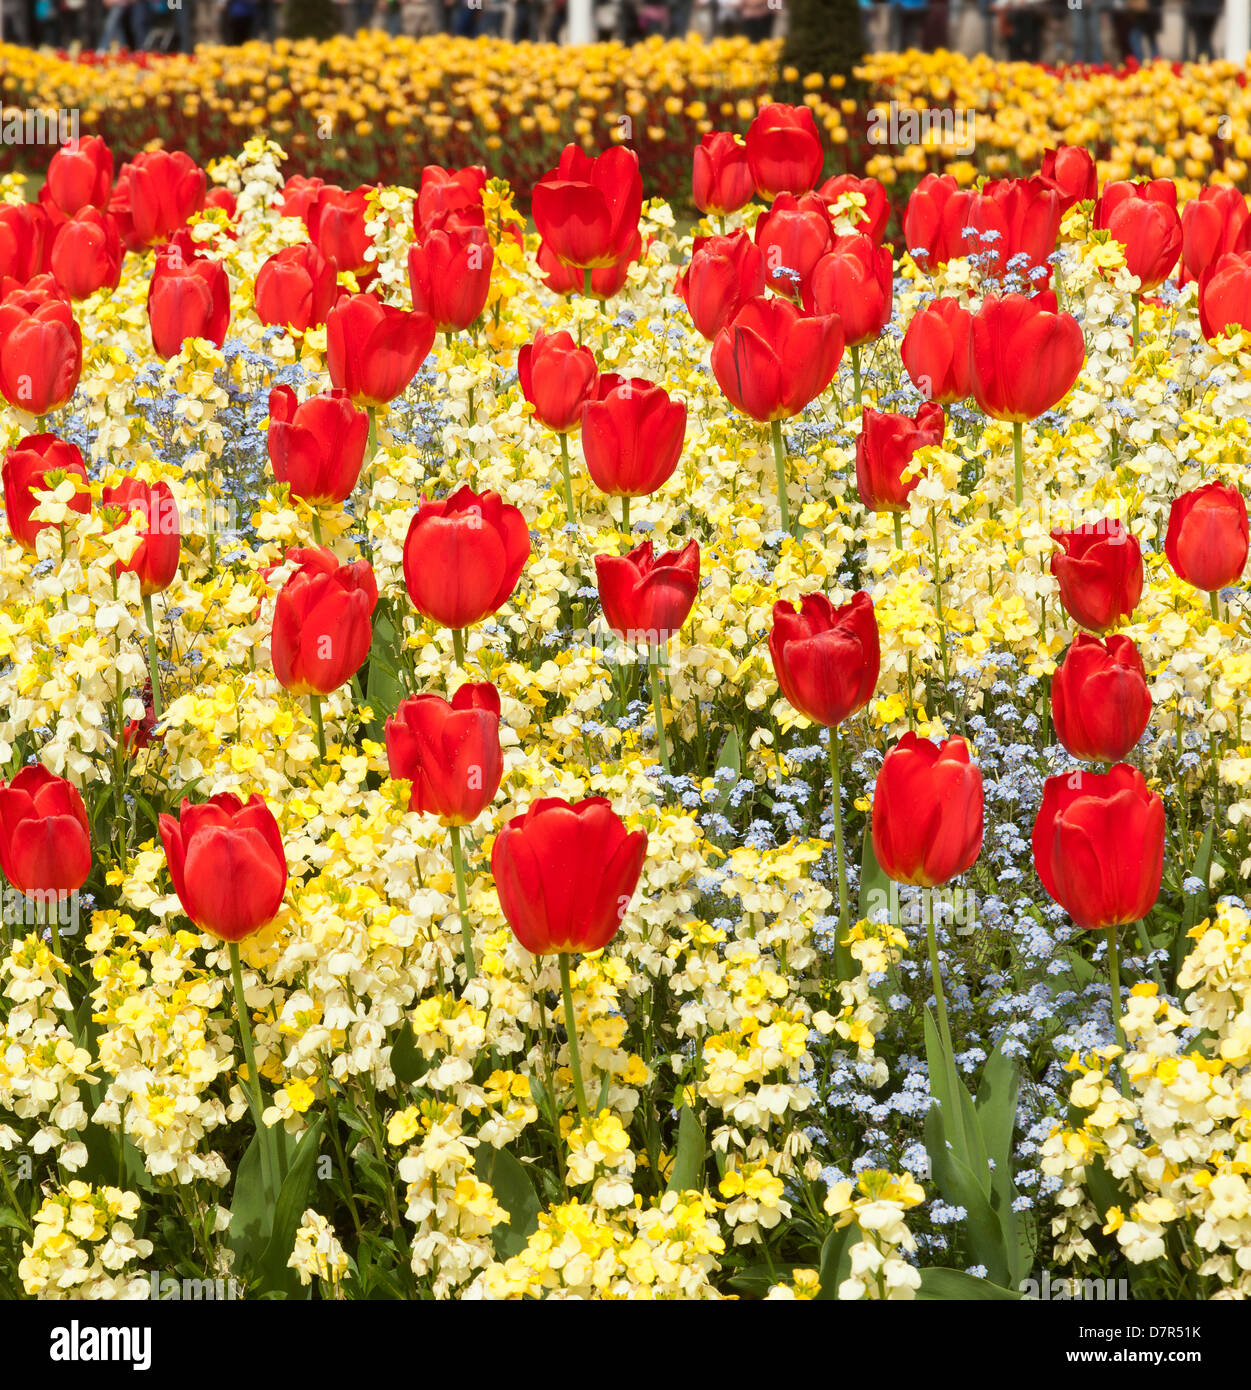 Red Tulips in a beautiful flowerbed Stock Photo